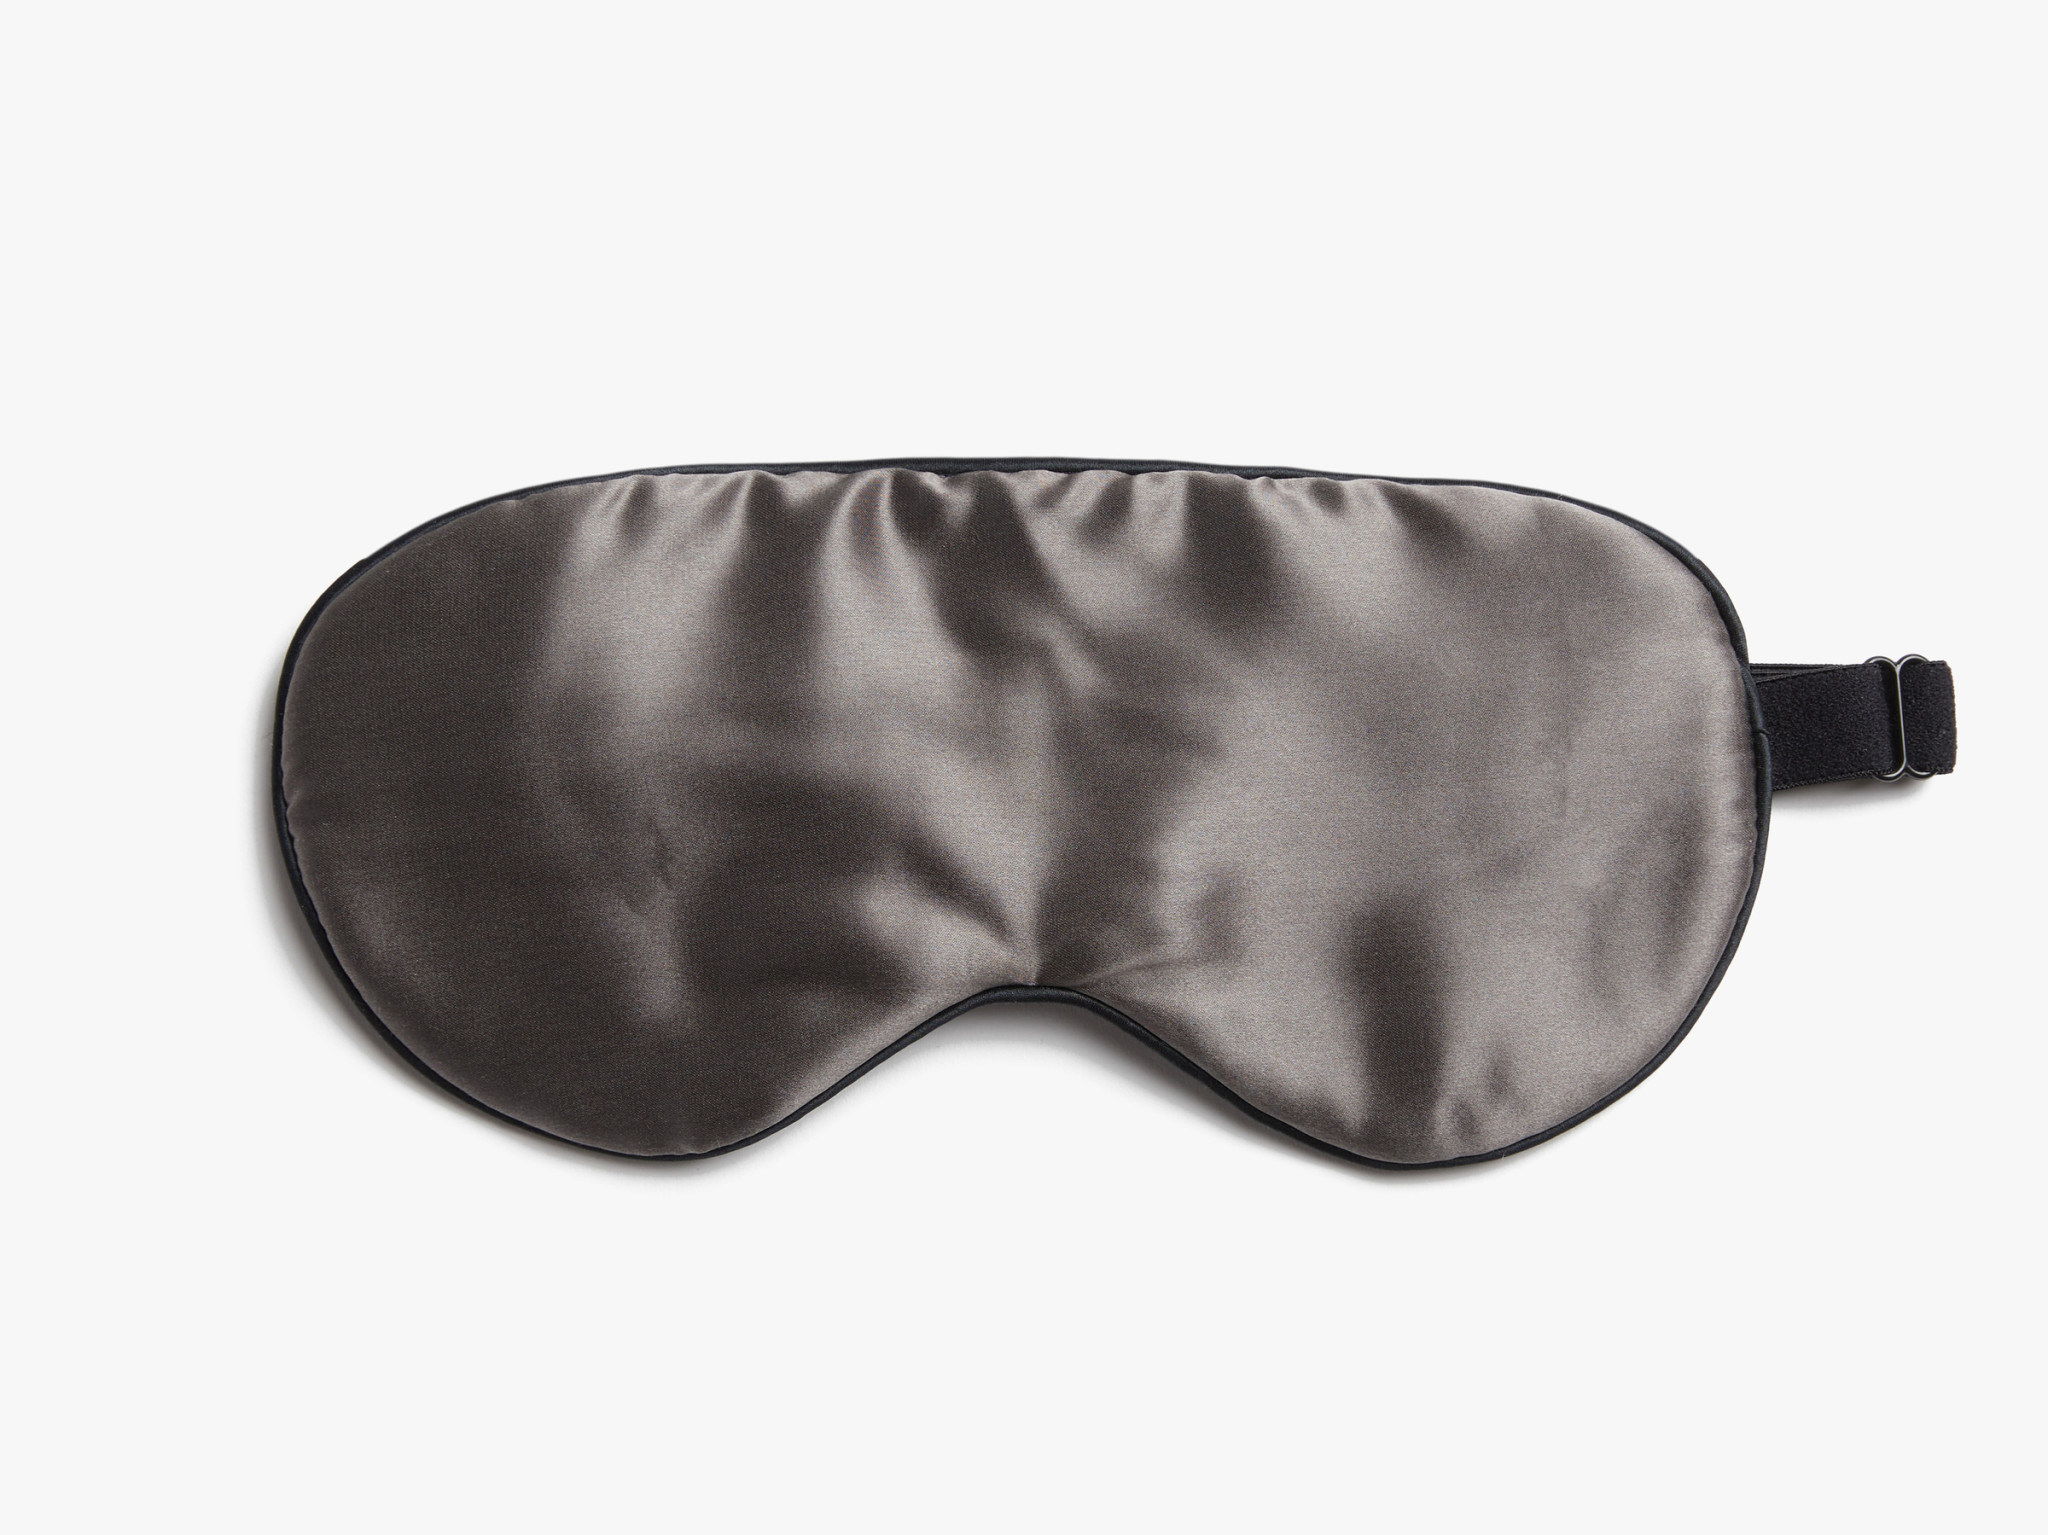 11 Best Sleep Masks To Help Block Out The World